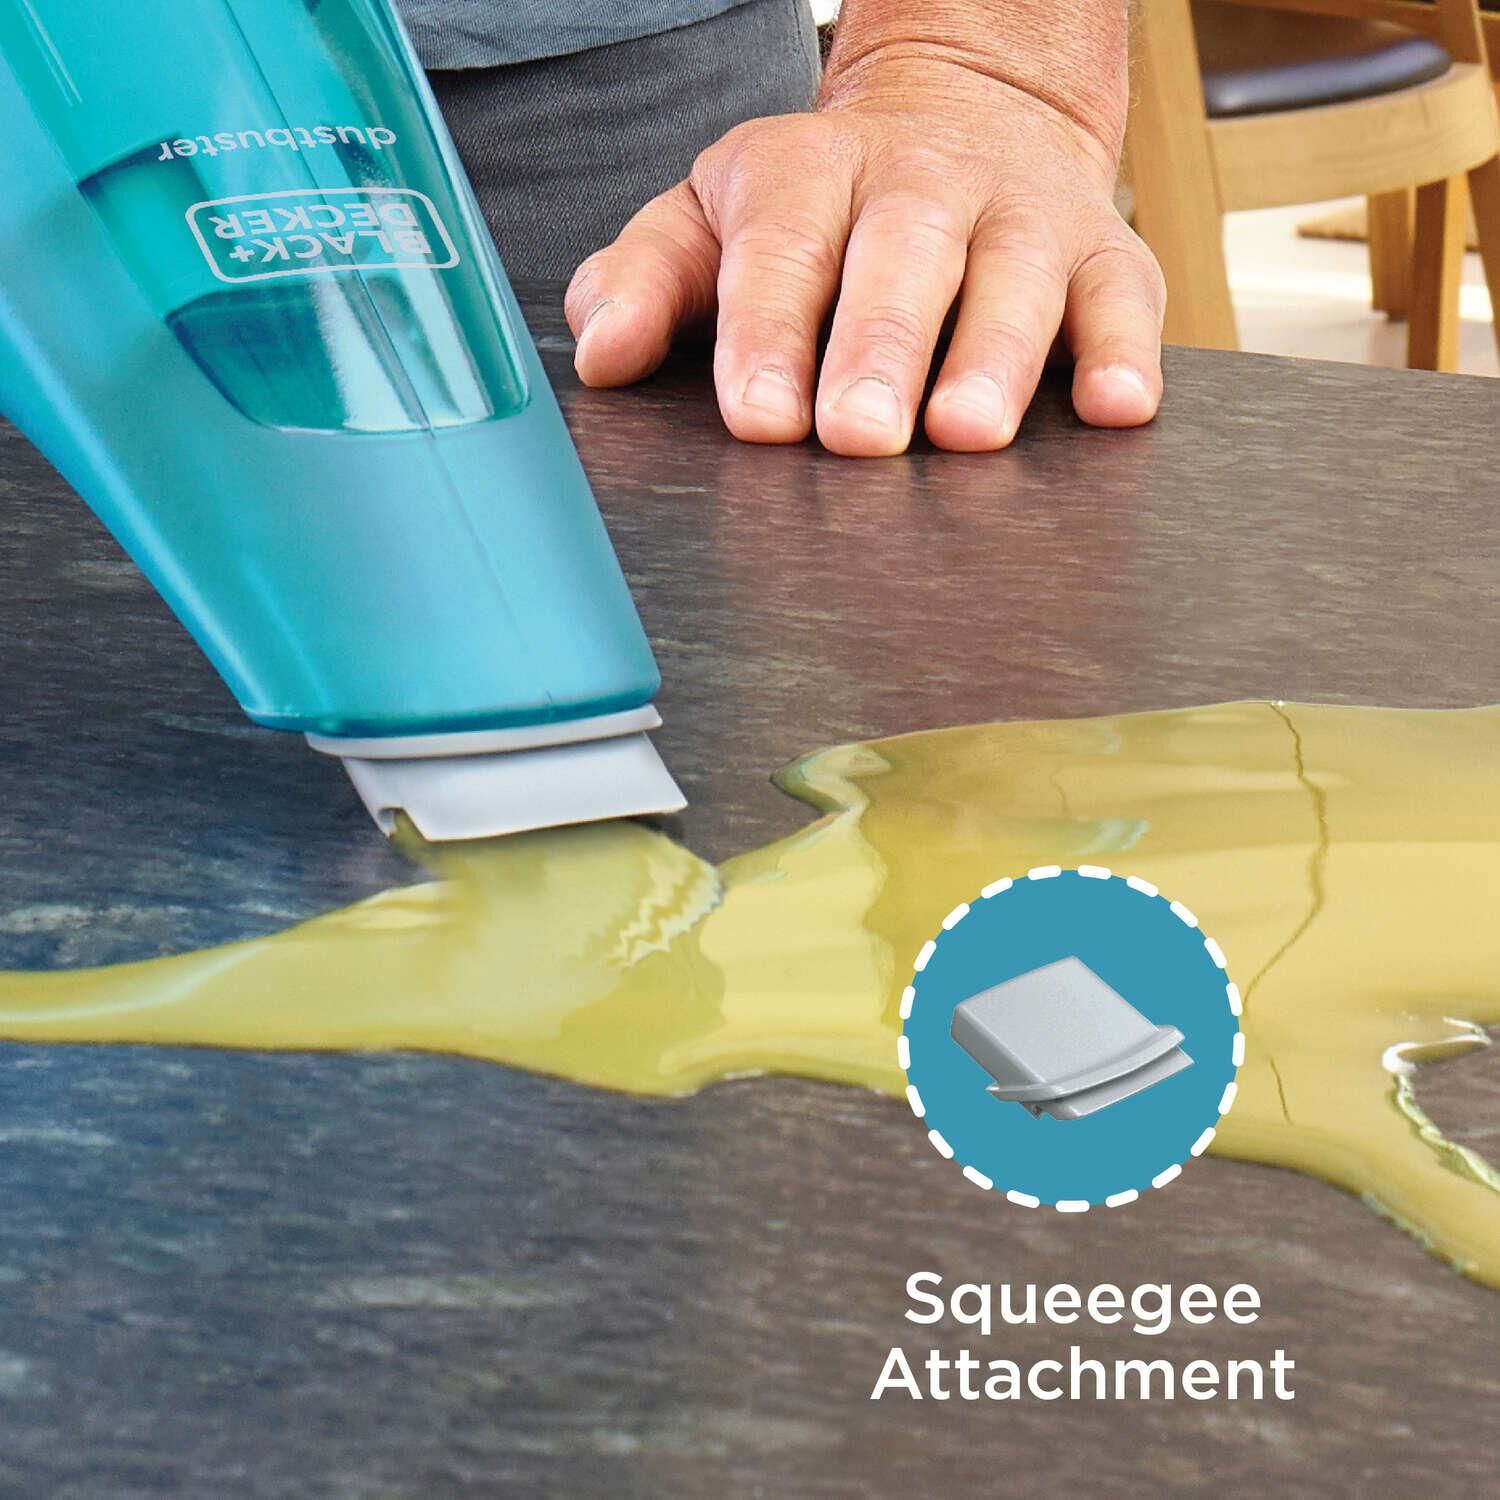 Dustbuster QuickClean Cordless Hand Vacuum Wet or Dry being used by person to clean spilled juice from countertop.